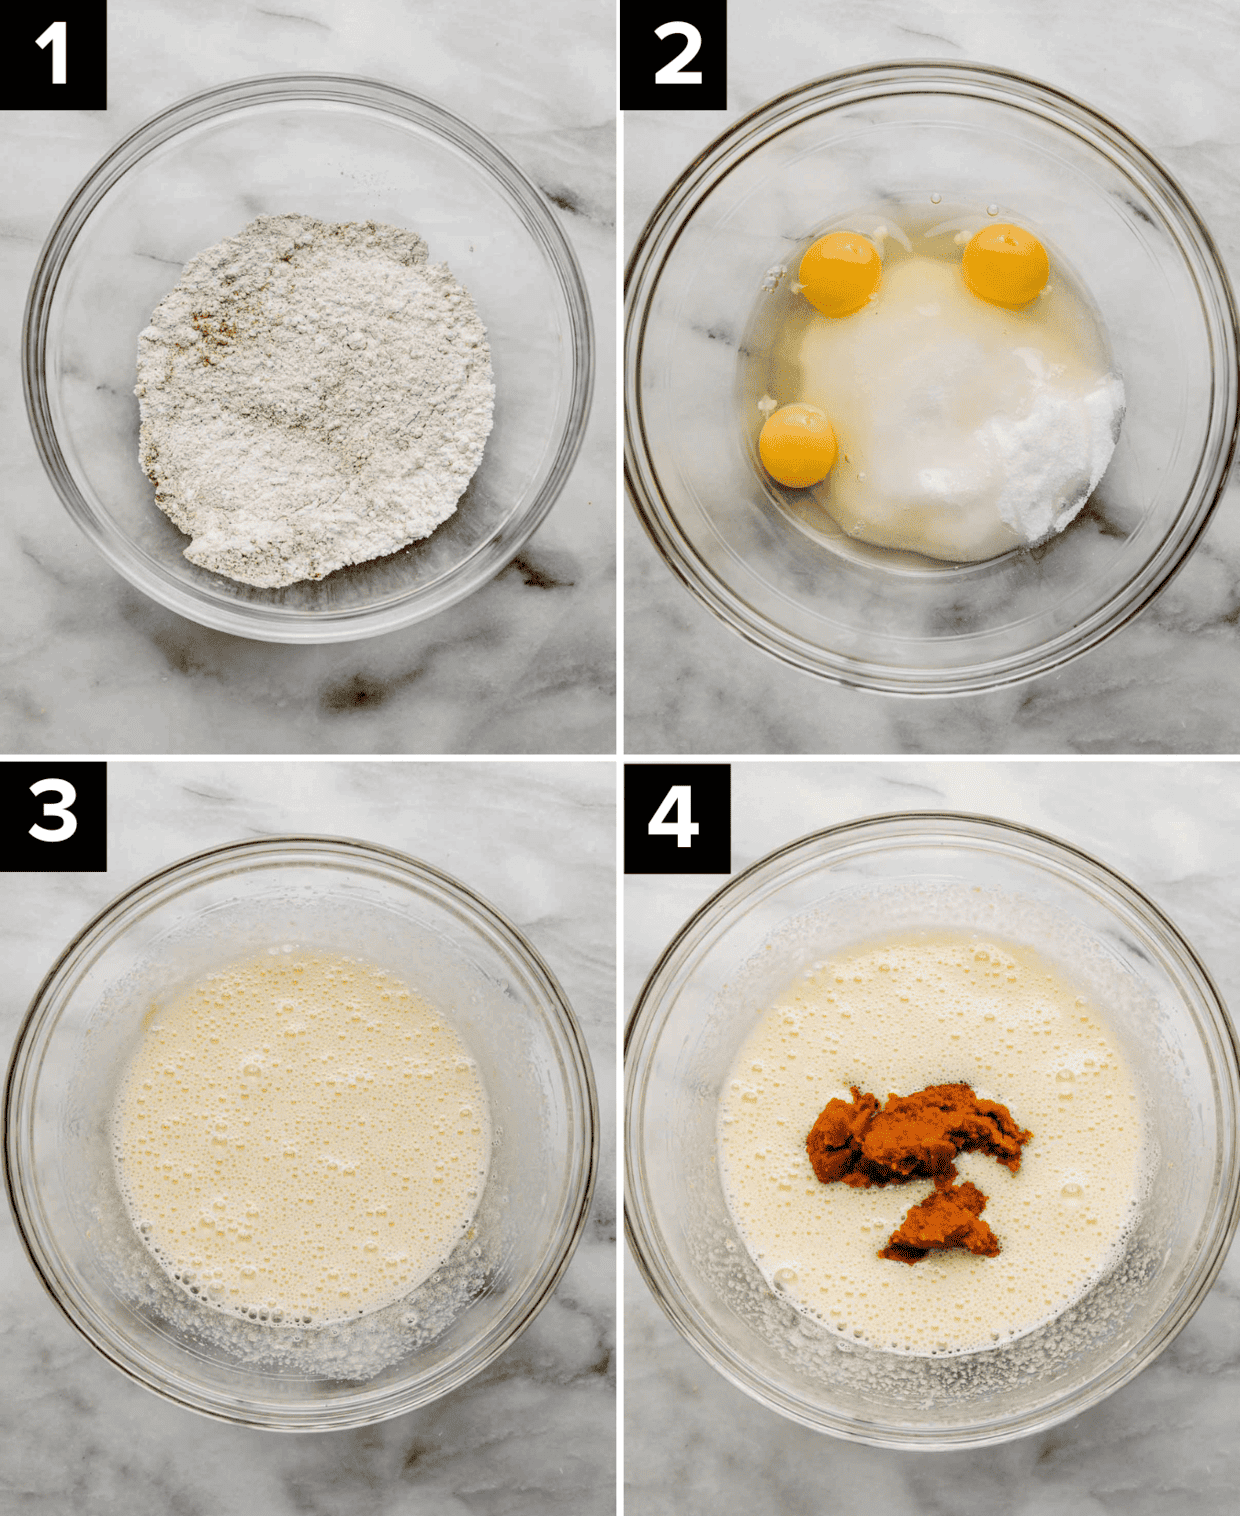 Four photos showing how to make Libby's Pumpkin Roll recipe, each photo has a glass bowl on a white background with addition of different ingredients in each photo, top left has flour, top right eggs and sugar, bottom left is yellow mixture, bottom right pumpkin puree added to bowl.